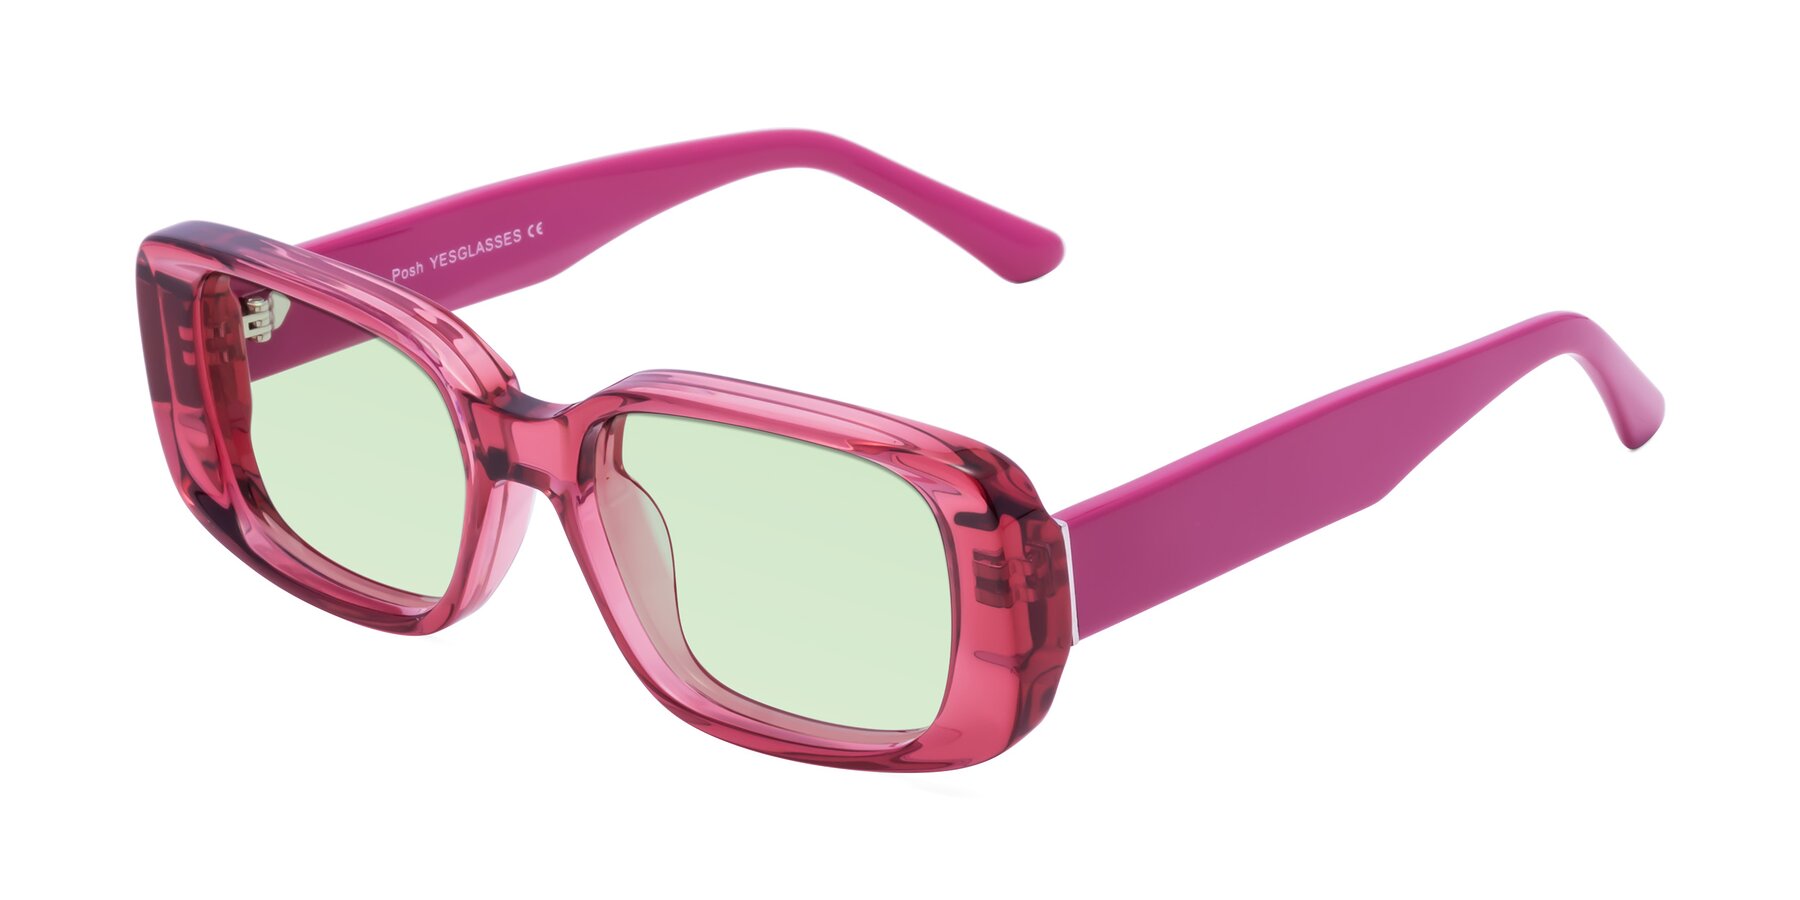 Angle of Posh in Transparent Pink with Light Green Tinted Lenses